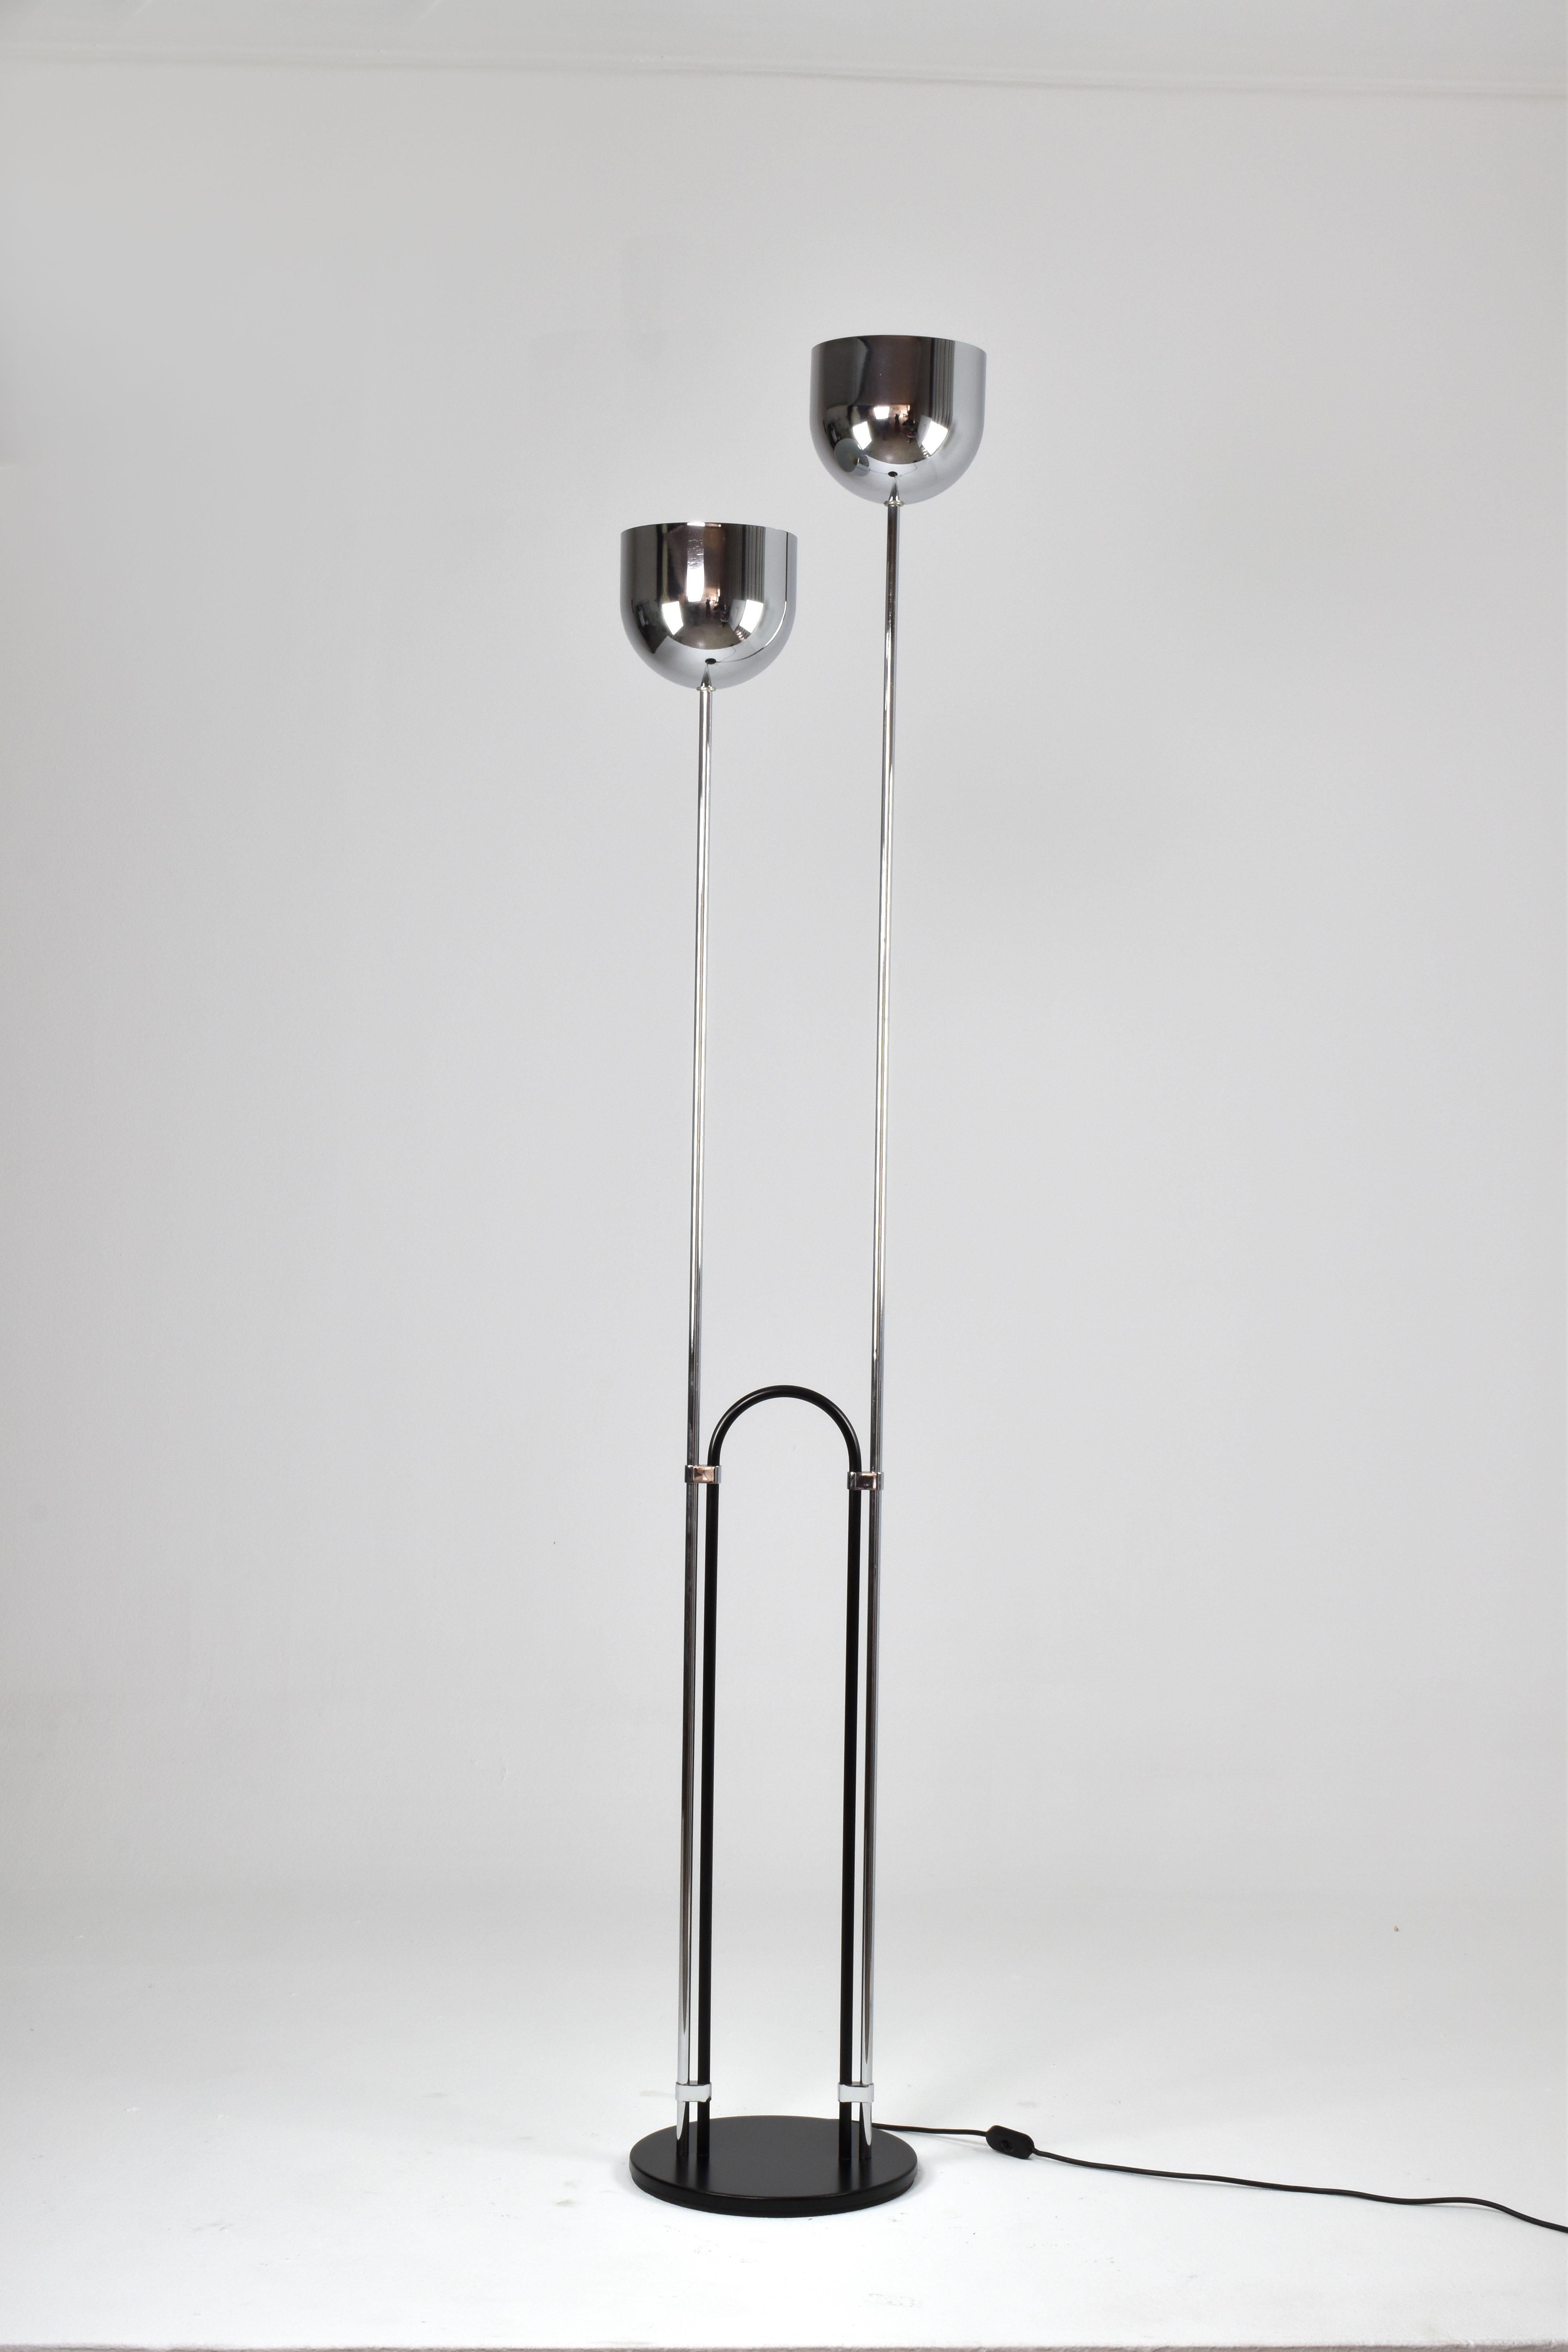 A stylish floor lamp from 1970s Italy, attributed to Reggiani. This distinctive piece features two chrome stems with upward-facing shades, casting a gentle, ambient glow towards the ceiling. Connecting these stems is a sleek circular tube, adding to